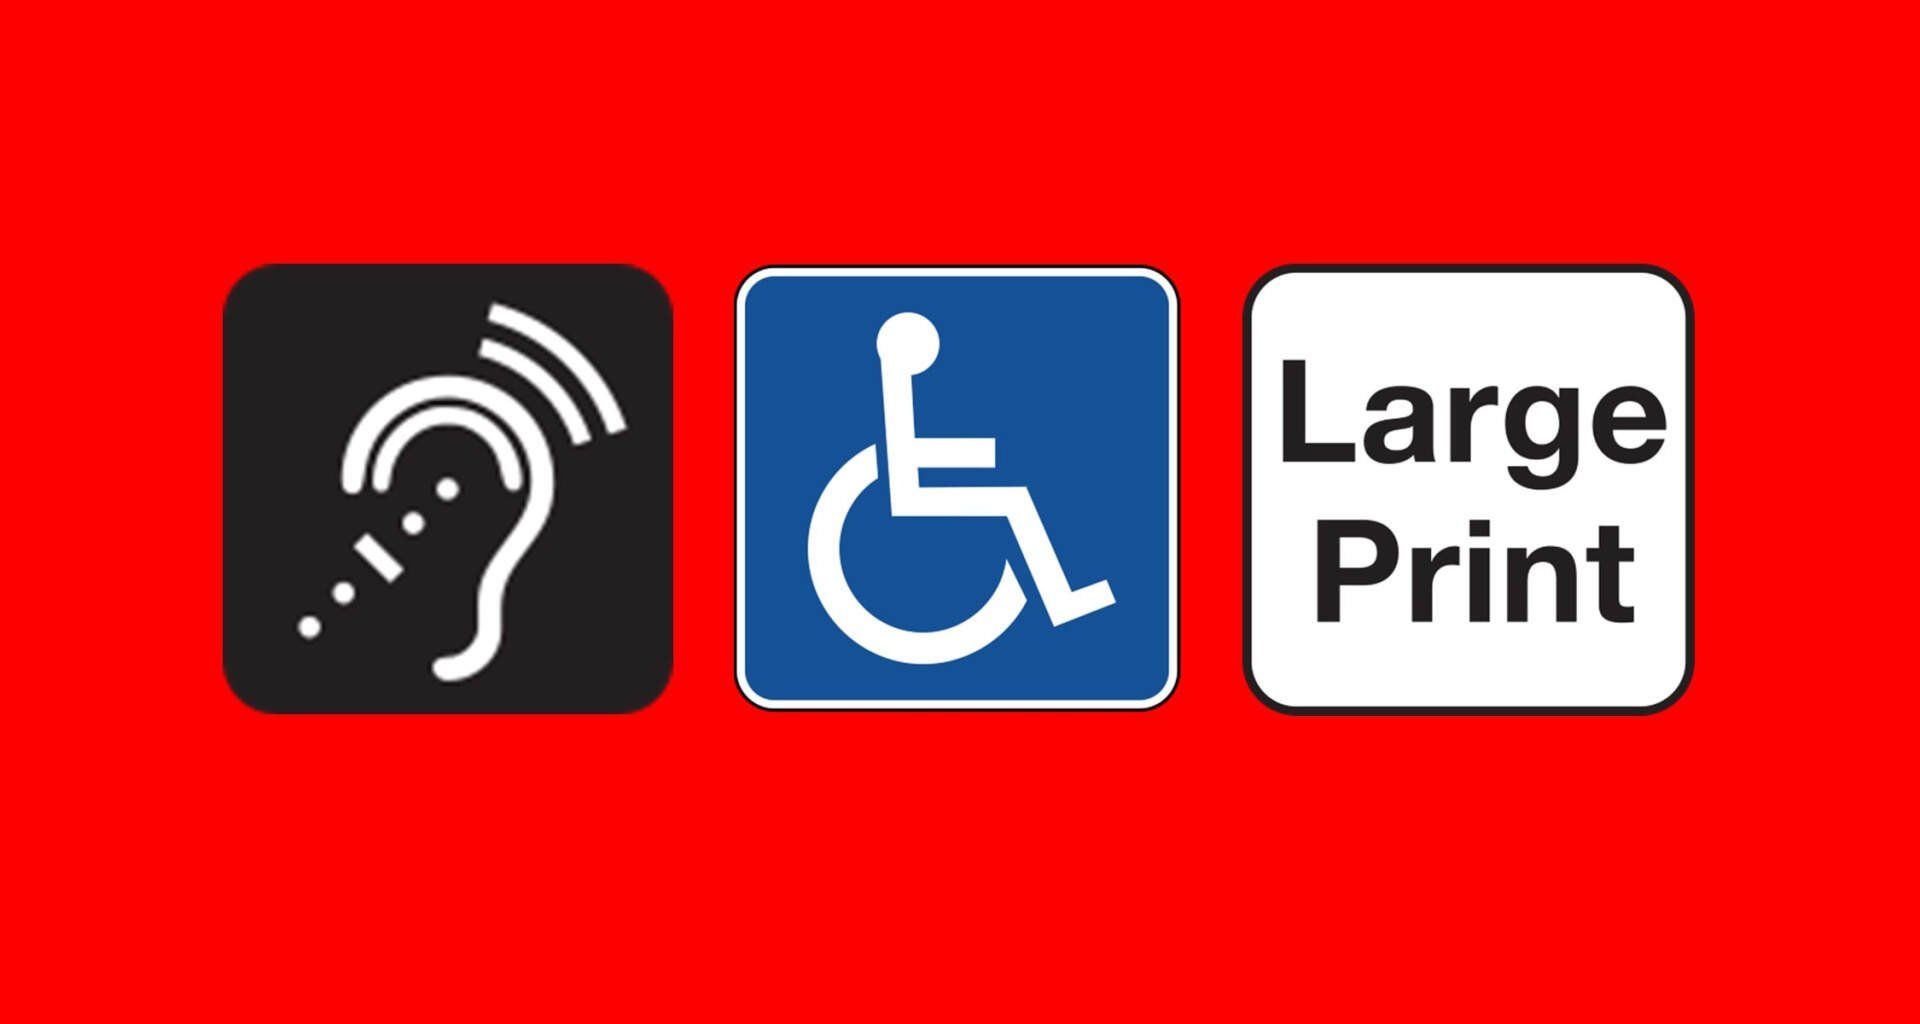 Accessibility icons: hearing, wheelchair, large print